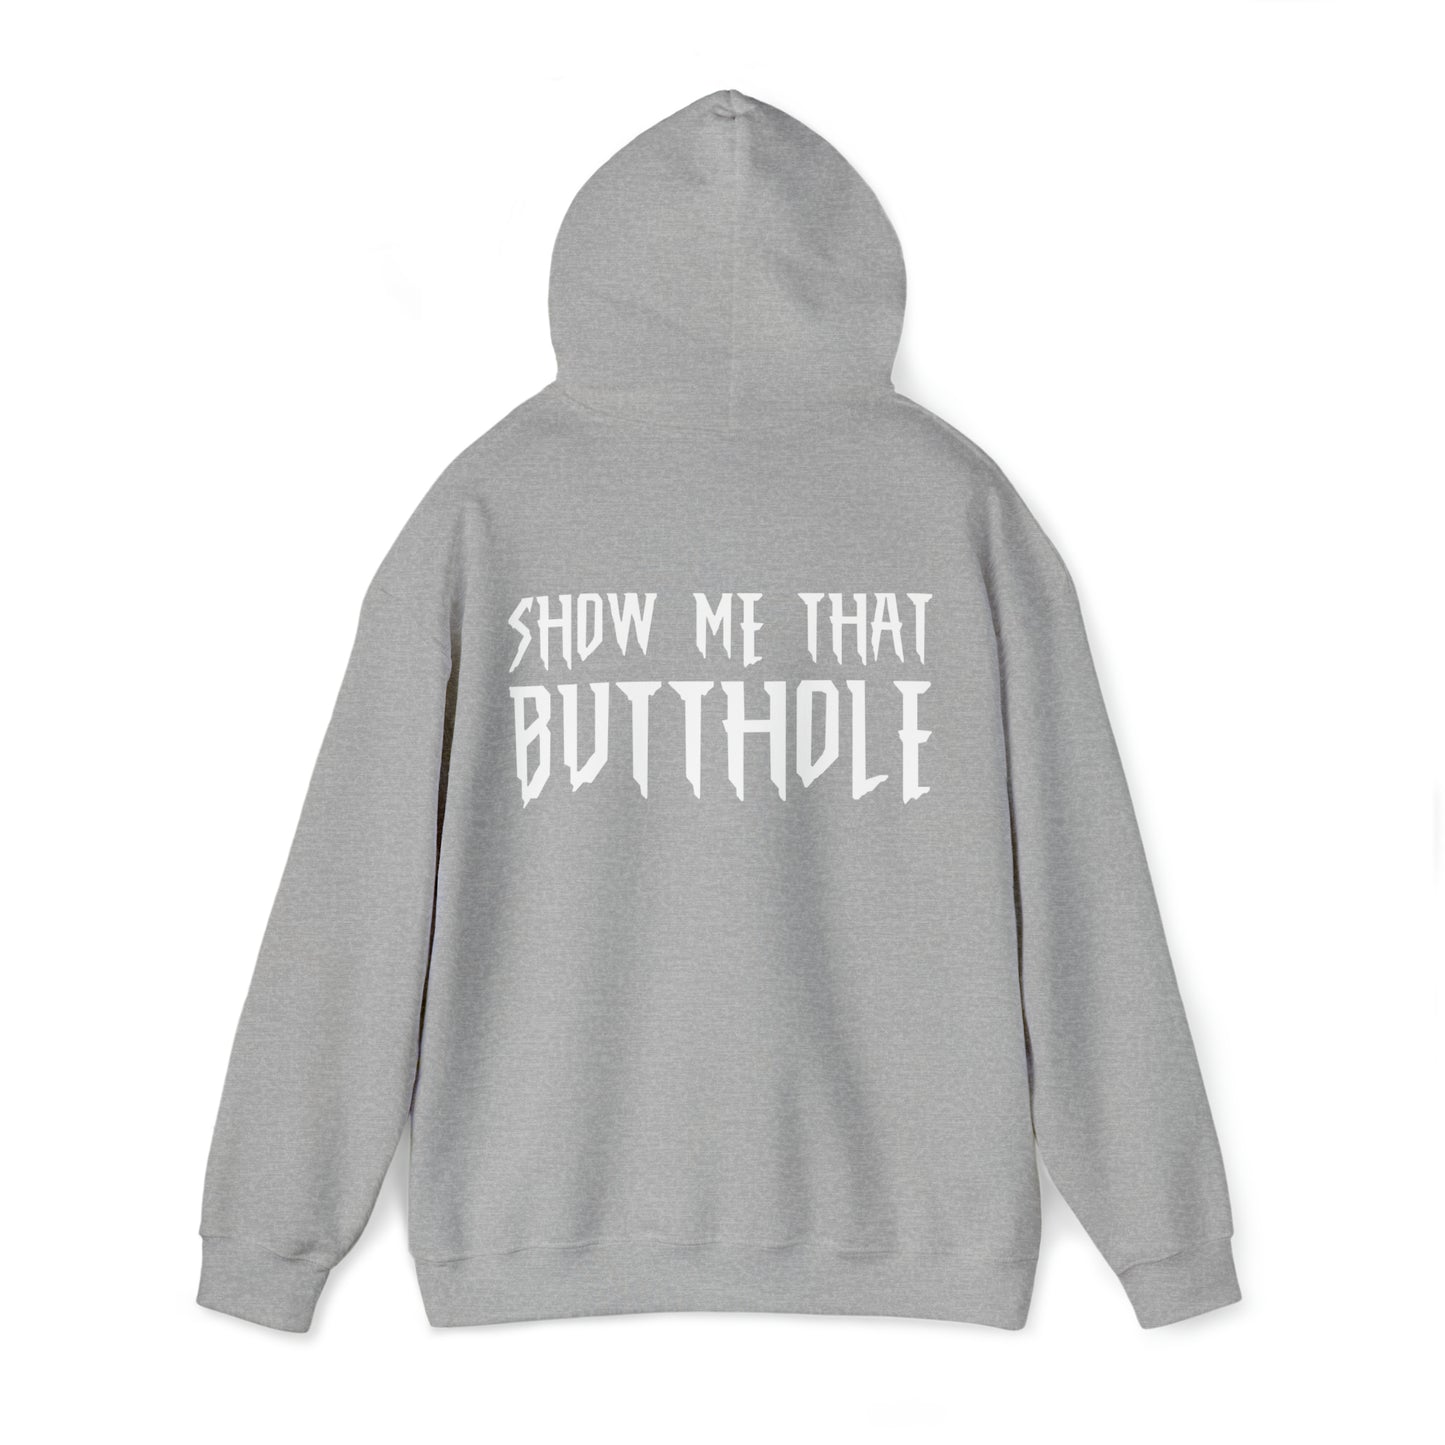 Show me that Butthole Hoodie